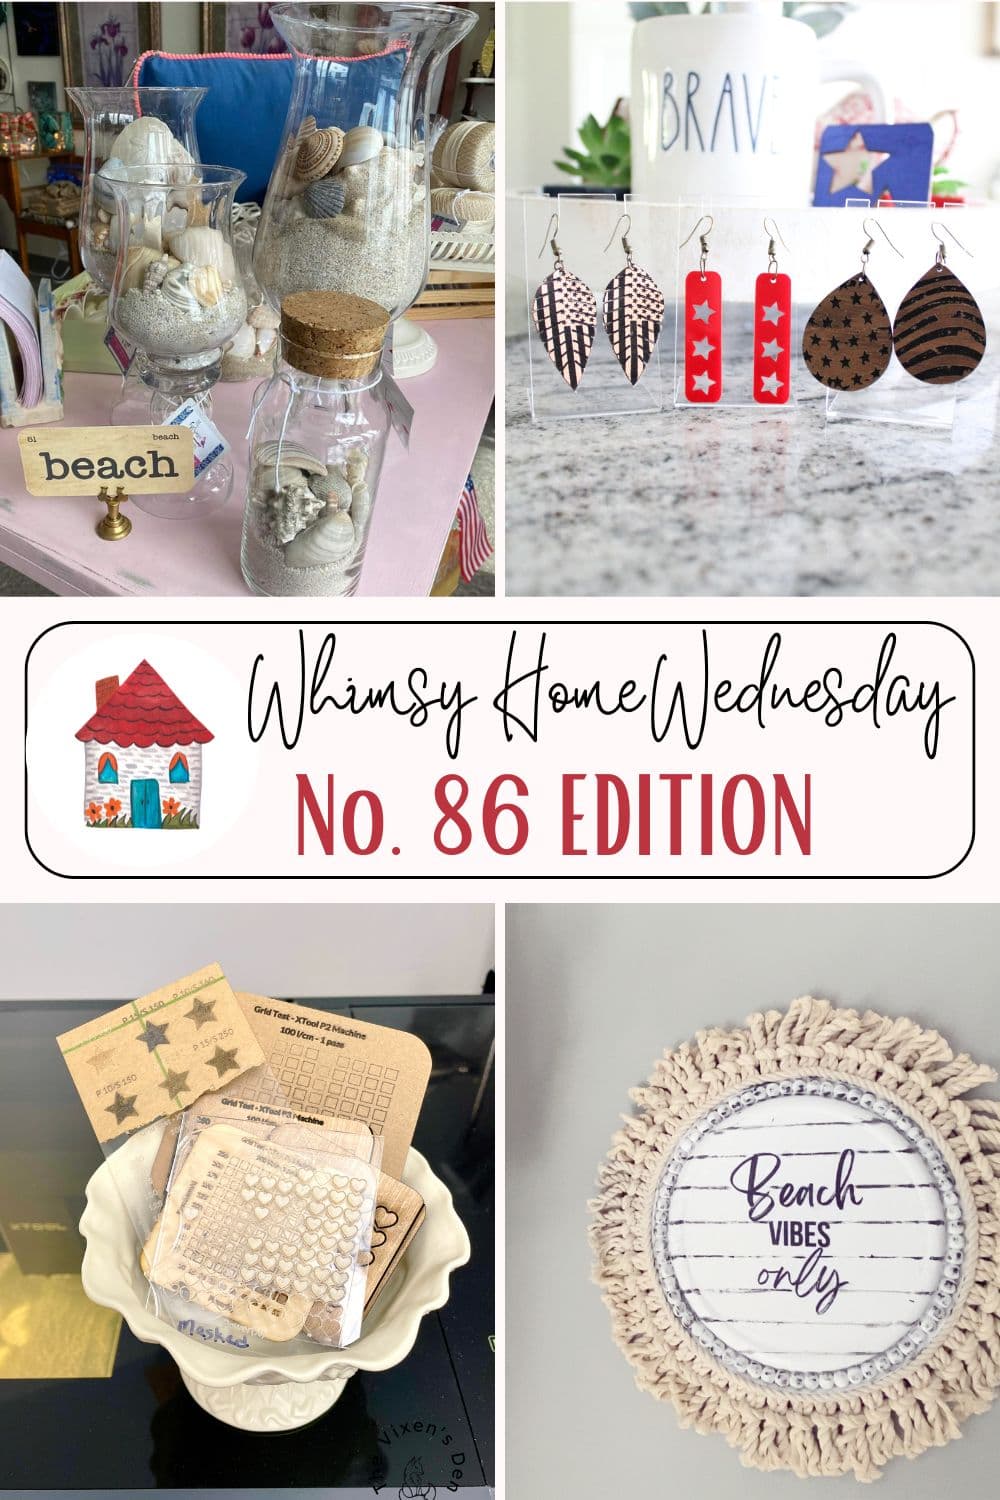 Join us on Whimsy Home Wednesday Blog Link Party No. 86 and see host projects, the features from the previous week and link up your posts!